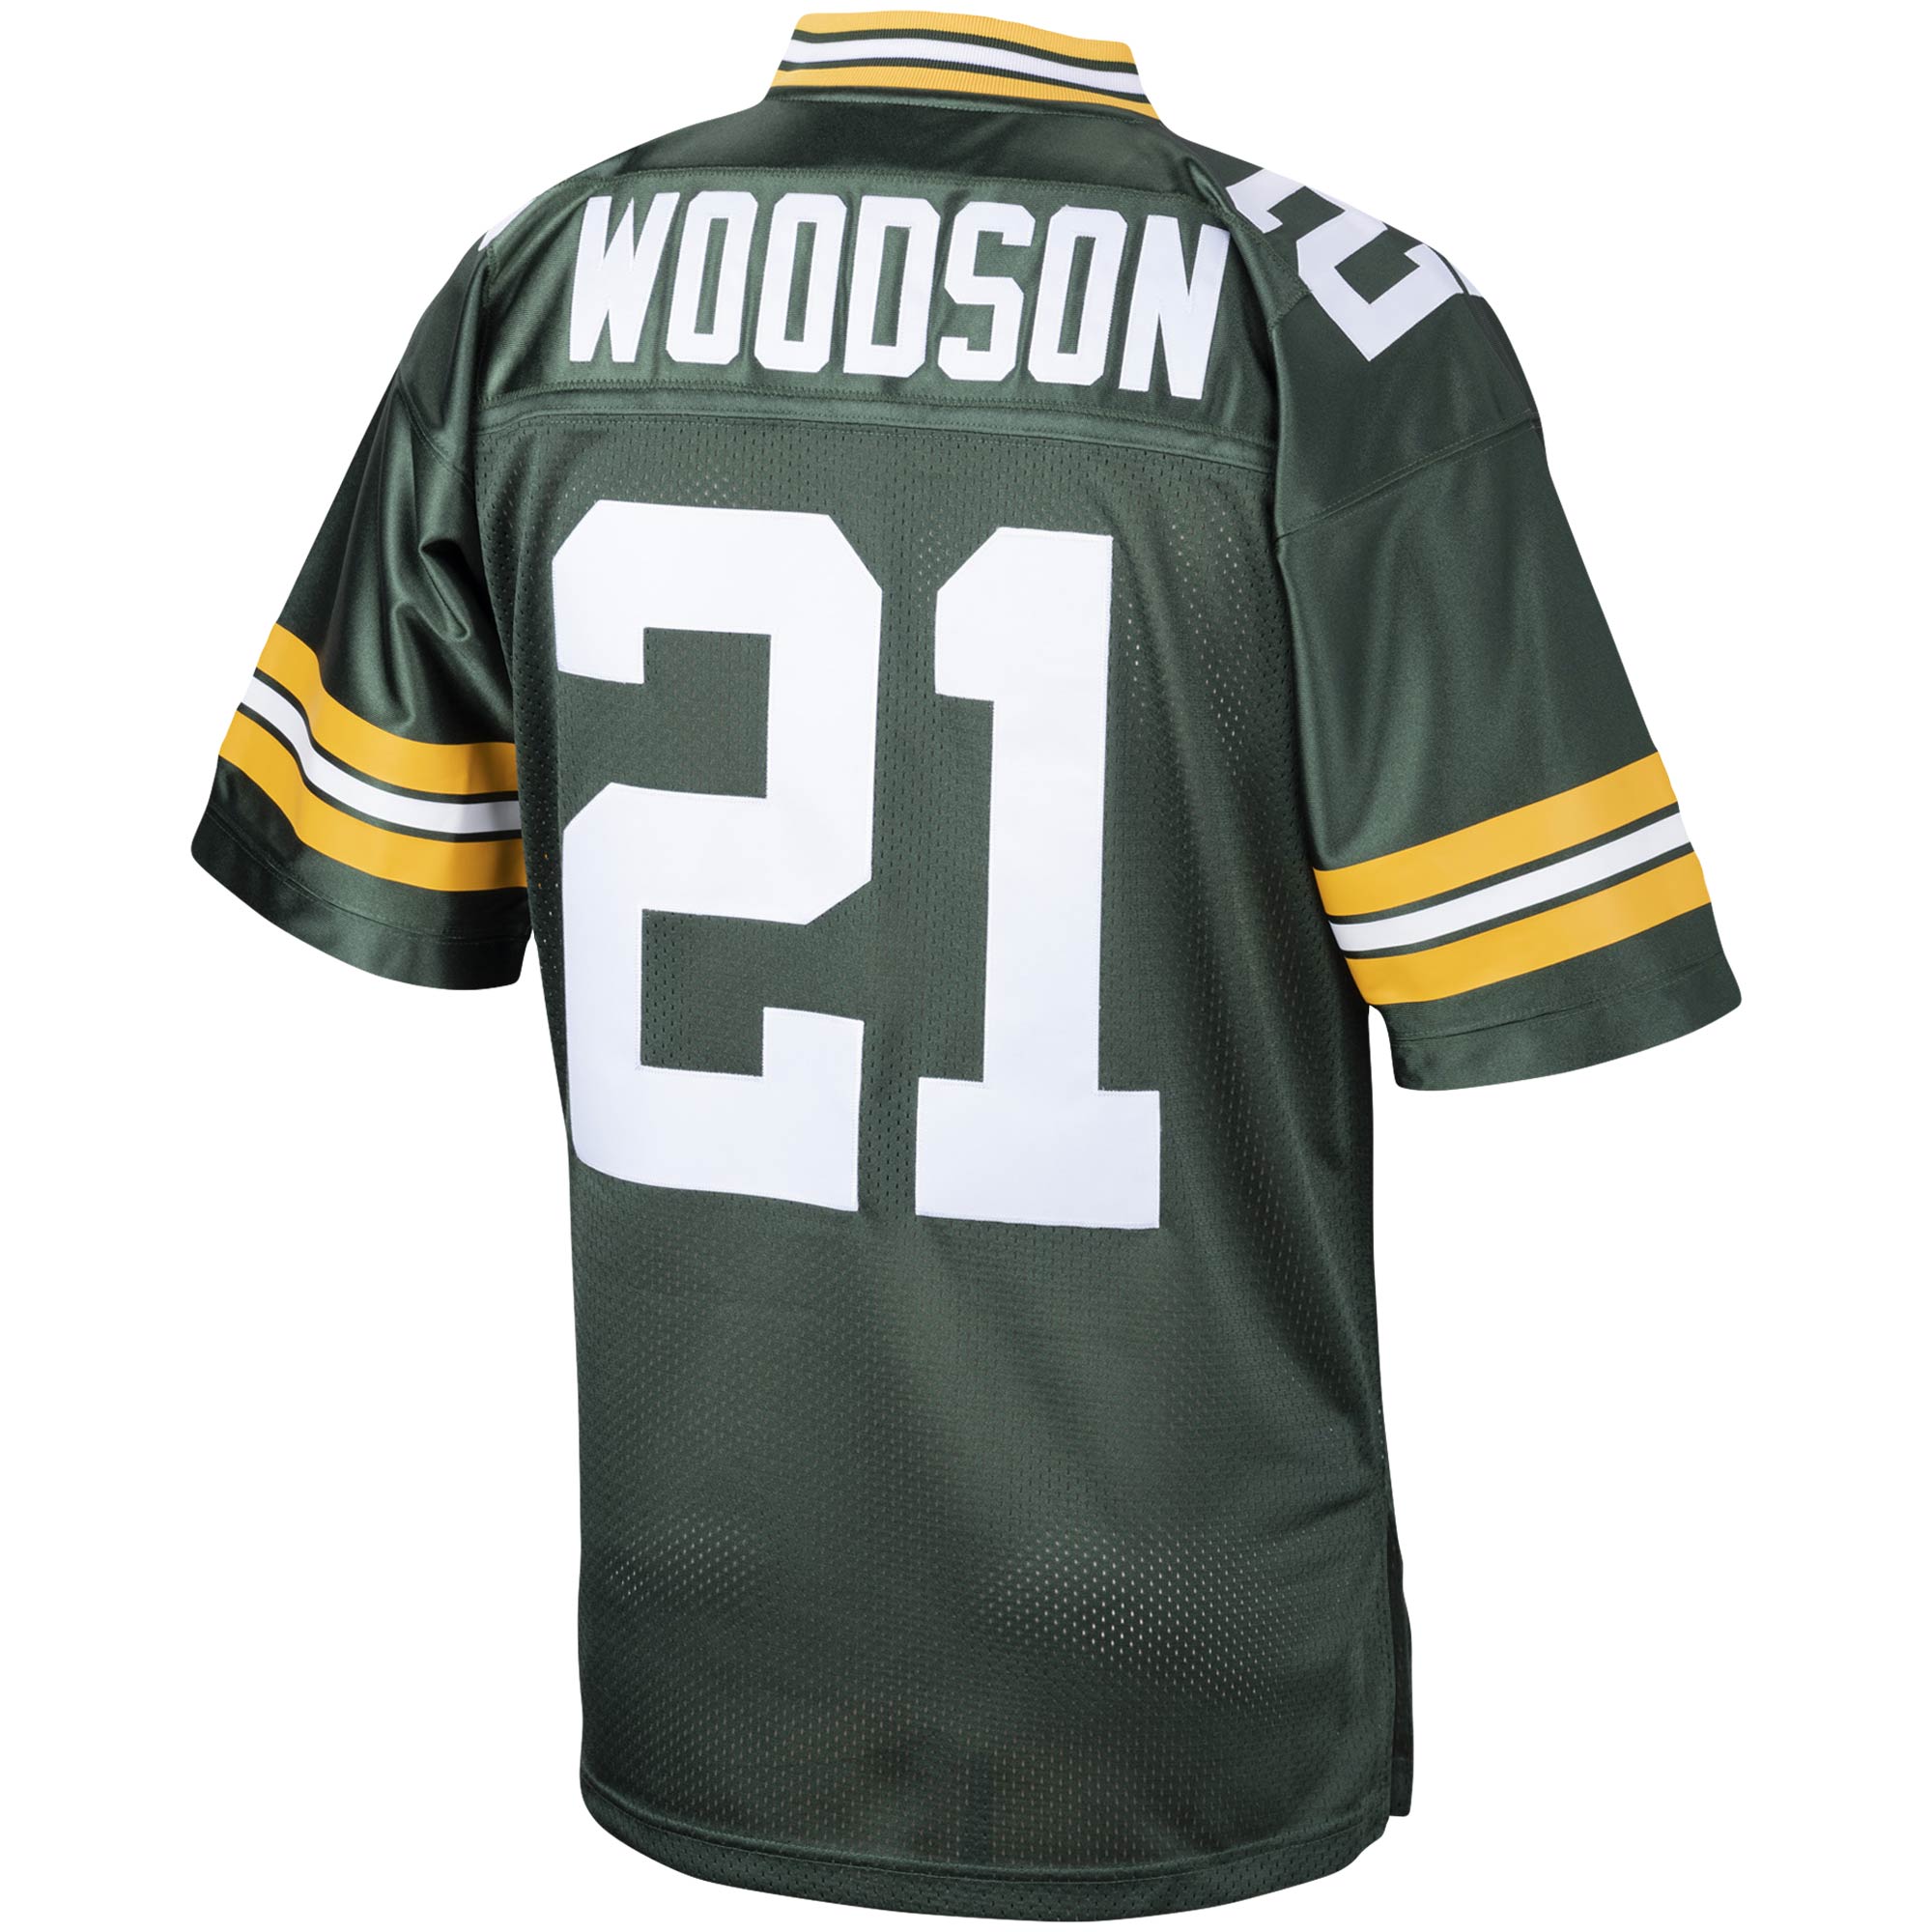 Men's Green Bay Packers Jerseys Green Charles Woodson 2010 Authentic Throwback Retired Player Style